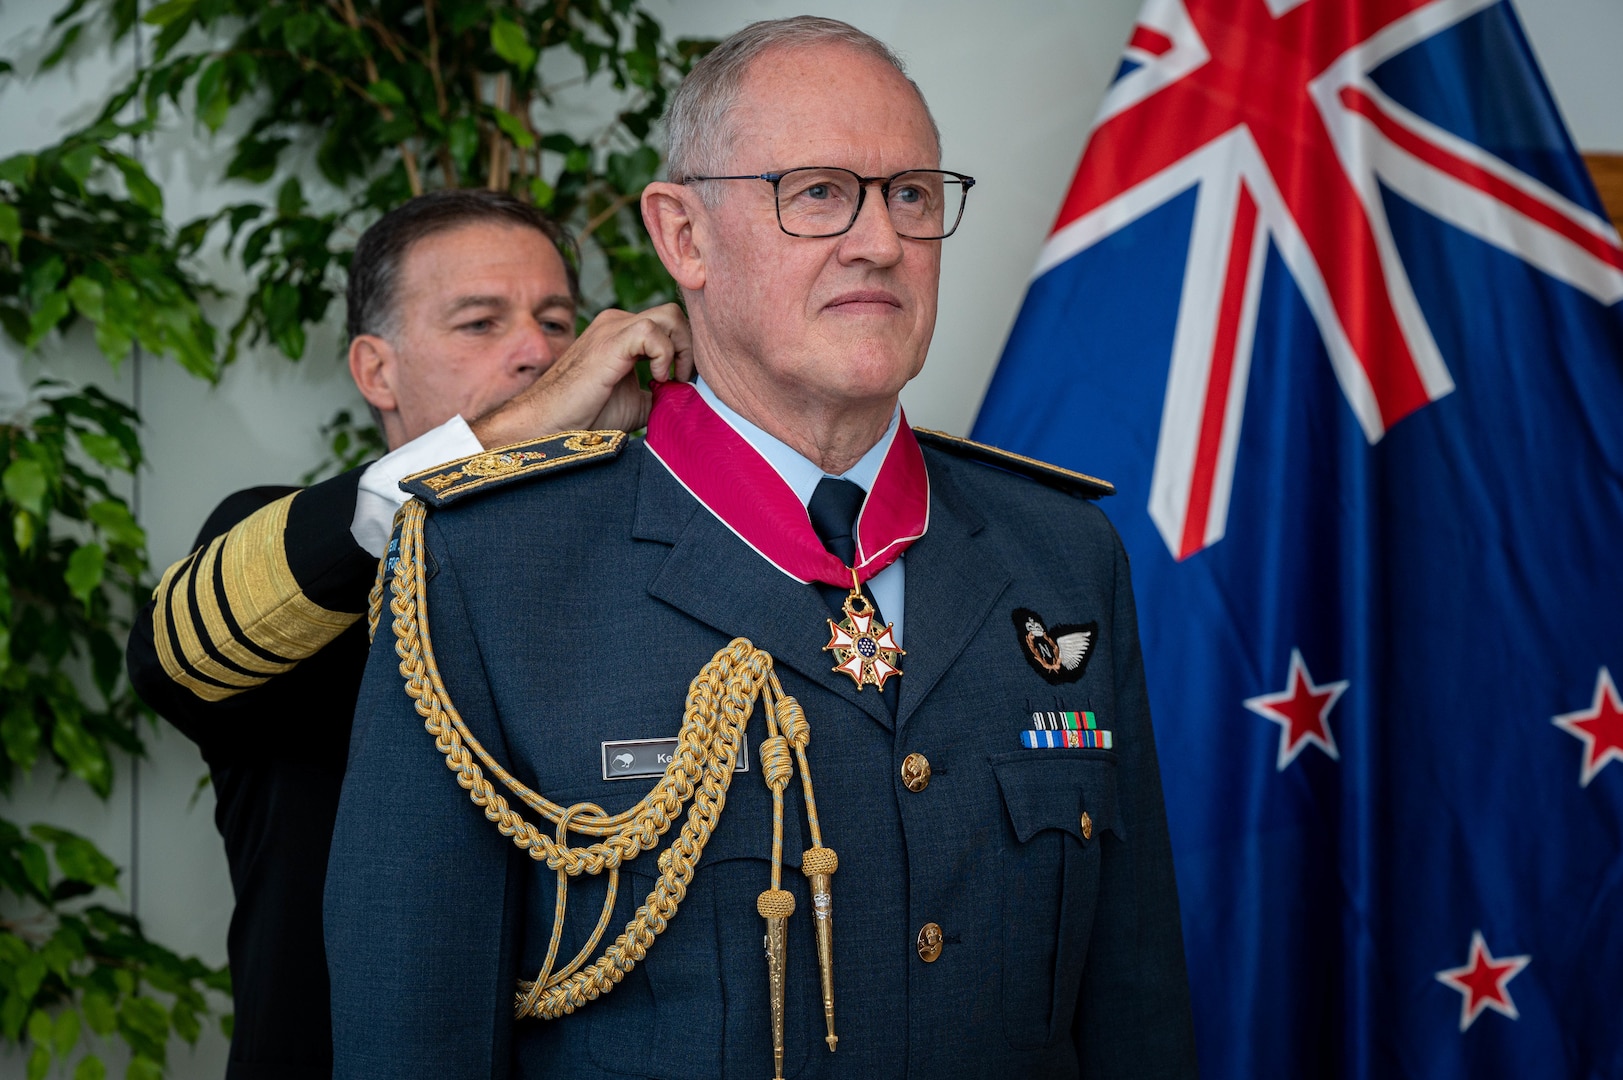 Air Marshal Kevin R. Short, New Zealand Defense Force Chief of Defence Force, receives the Legion of Merit pinned by Adm. John C. Aquilino, Commander of U.S. Indo-Pacific Command, in Wellington, New Zealand, on April 6, 2024. The Legion of Merit is the highest accolade that the U.S. can bestow upon a foreign leader; it is reserved for individuals who have shown exceptionally meritorious conduct in the performance of outstanding services. USINDOPACOM is committed to enhancing stability in the Indo-Pacific region by promoting security cooperation, encouraging peaceful development, responding to contingencies, deterring aggression and, when necessary, fighting to win. (U.S. Navy photo by Chief Mass Communication Specialist Shannon M. Smith)